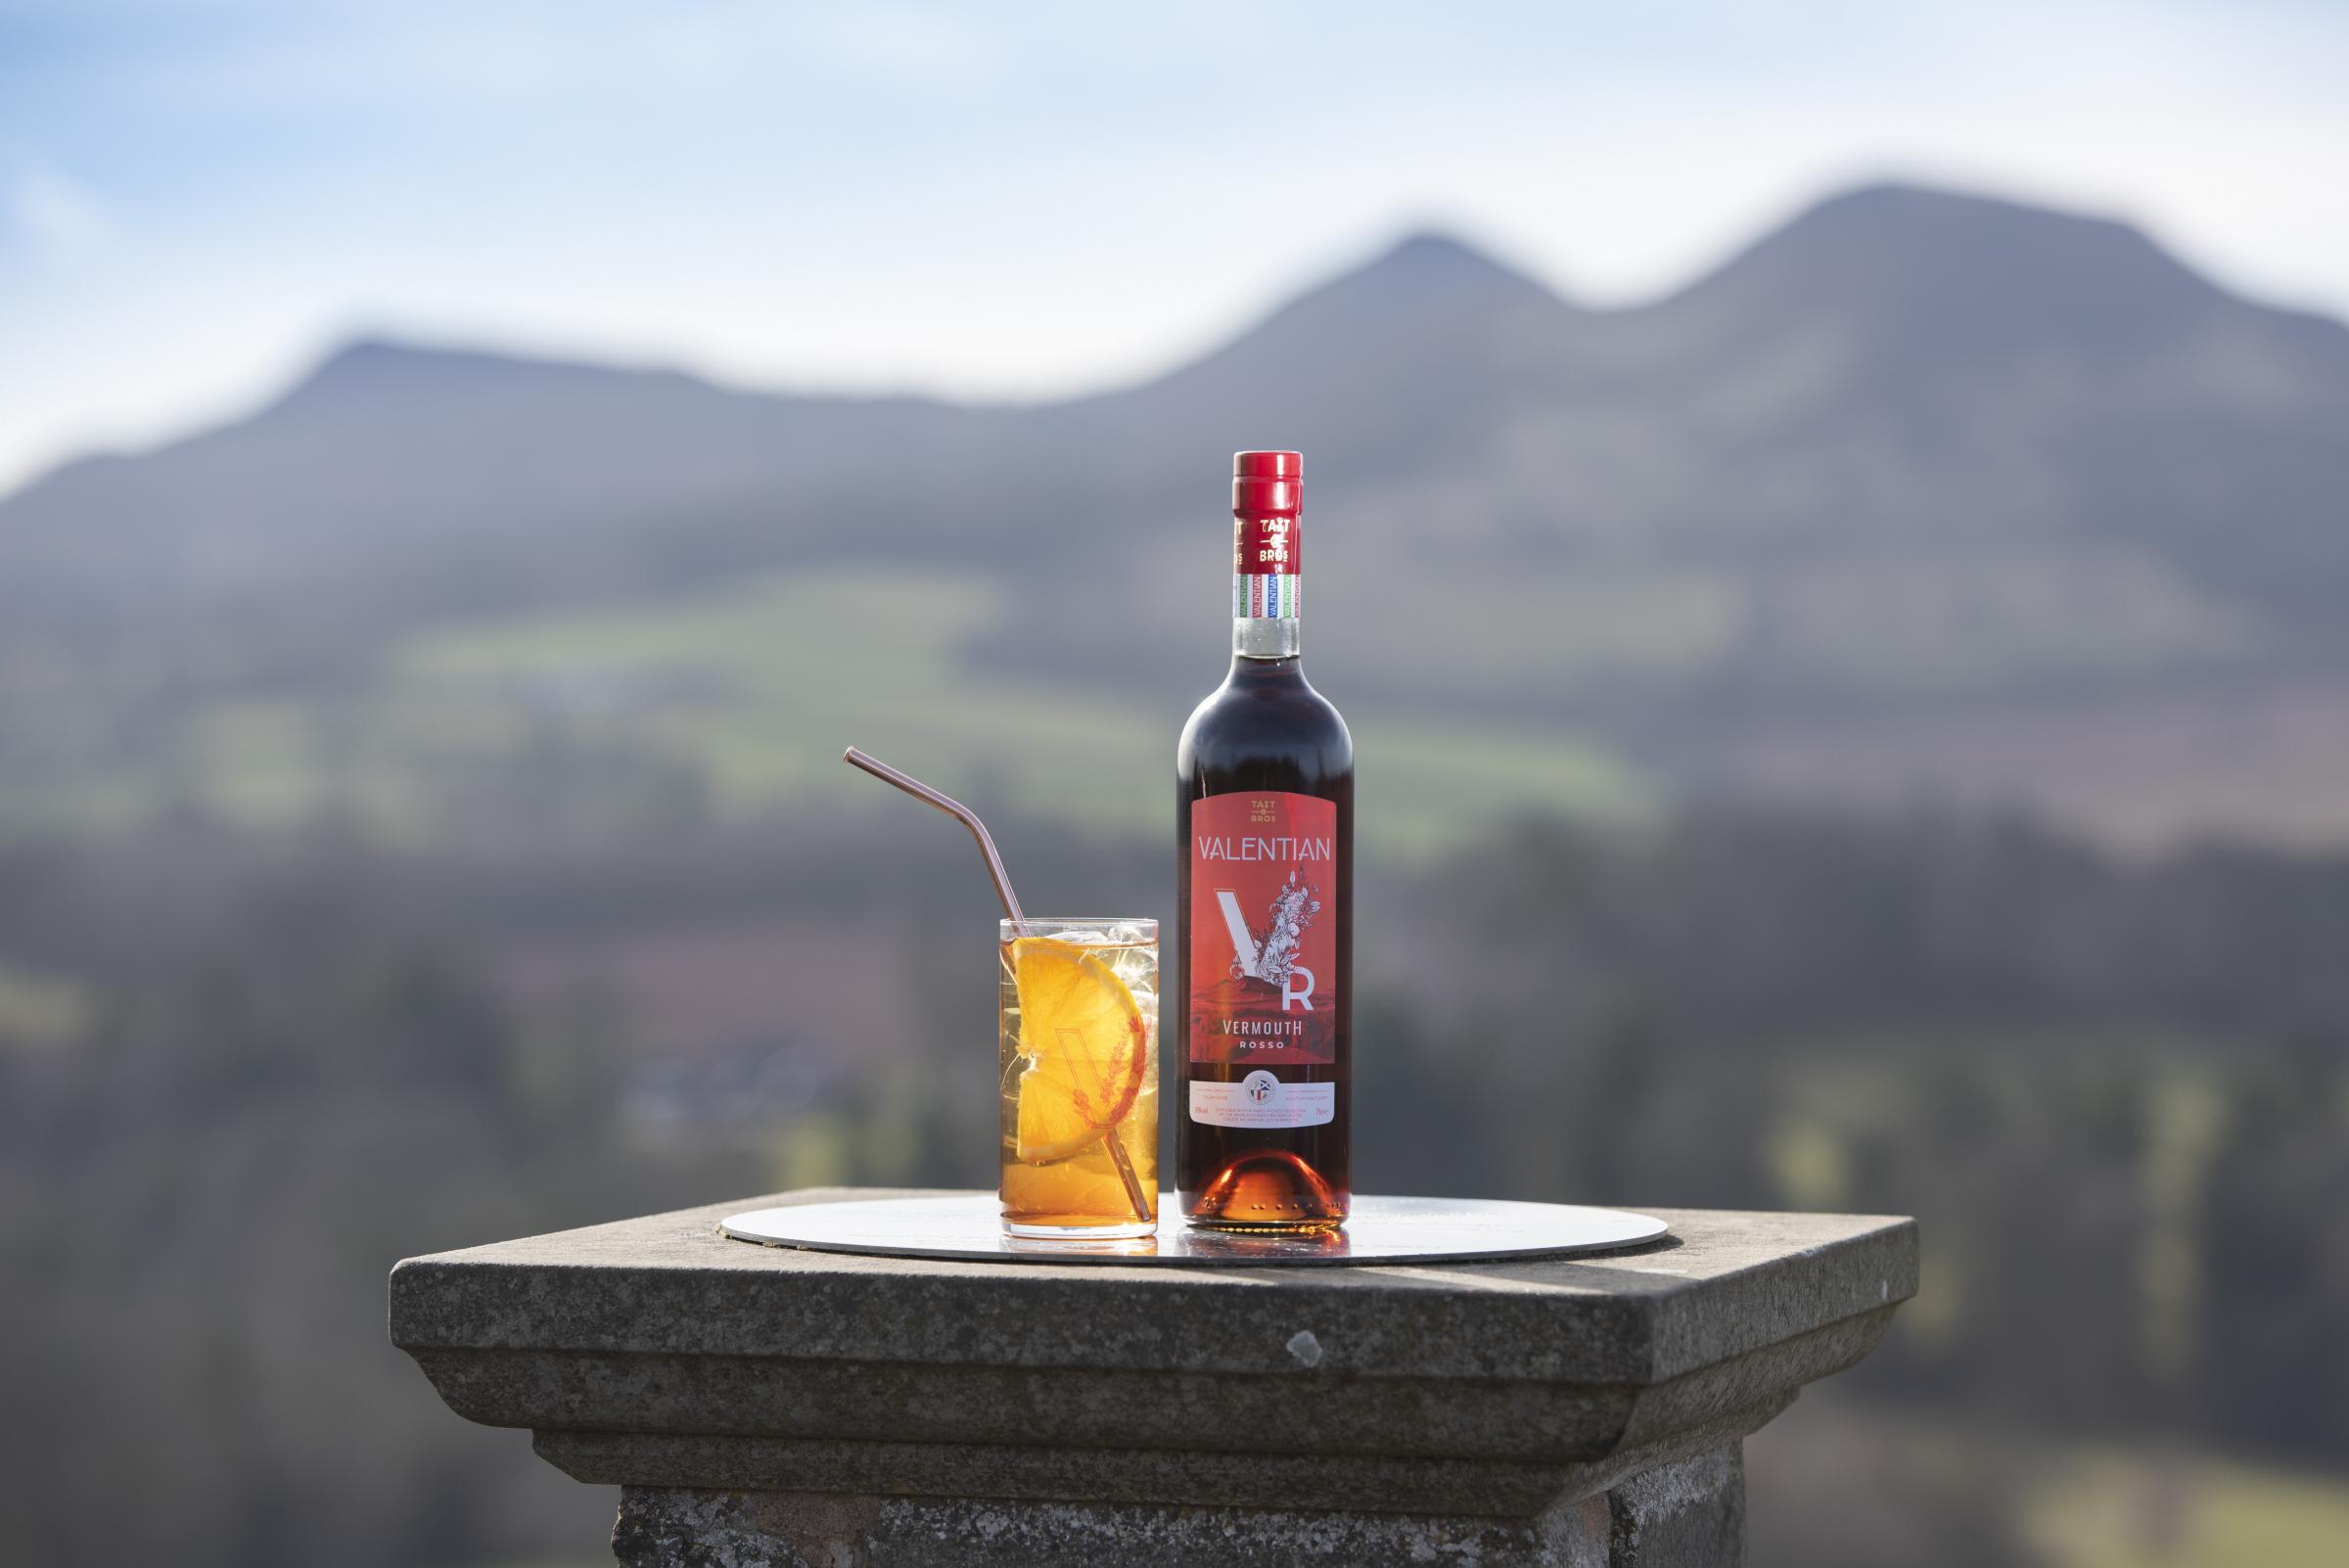 The Tait brothers Valentian Vermouth could be a real contender on the Scottish drinks market. Photo by Kirsty Anderson.